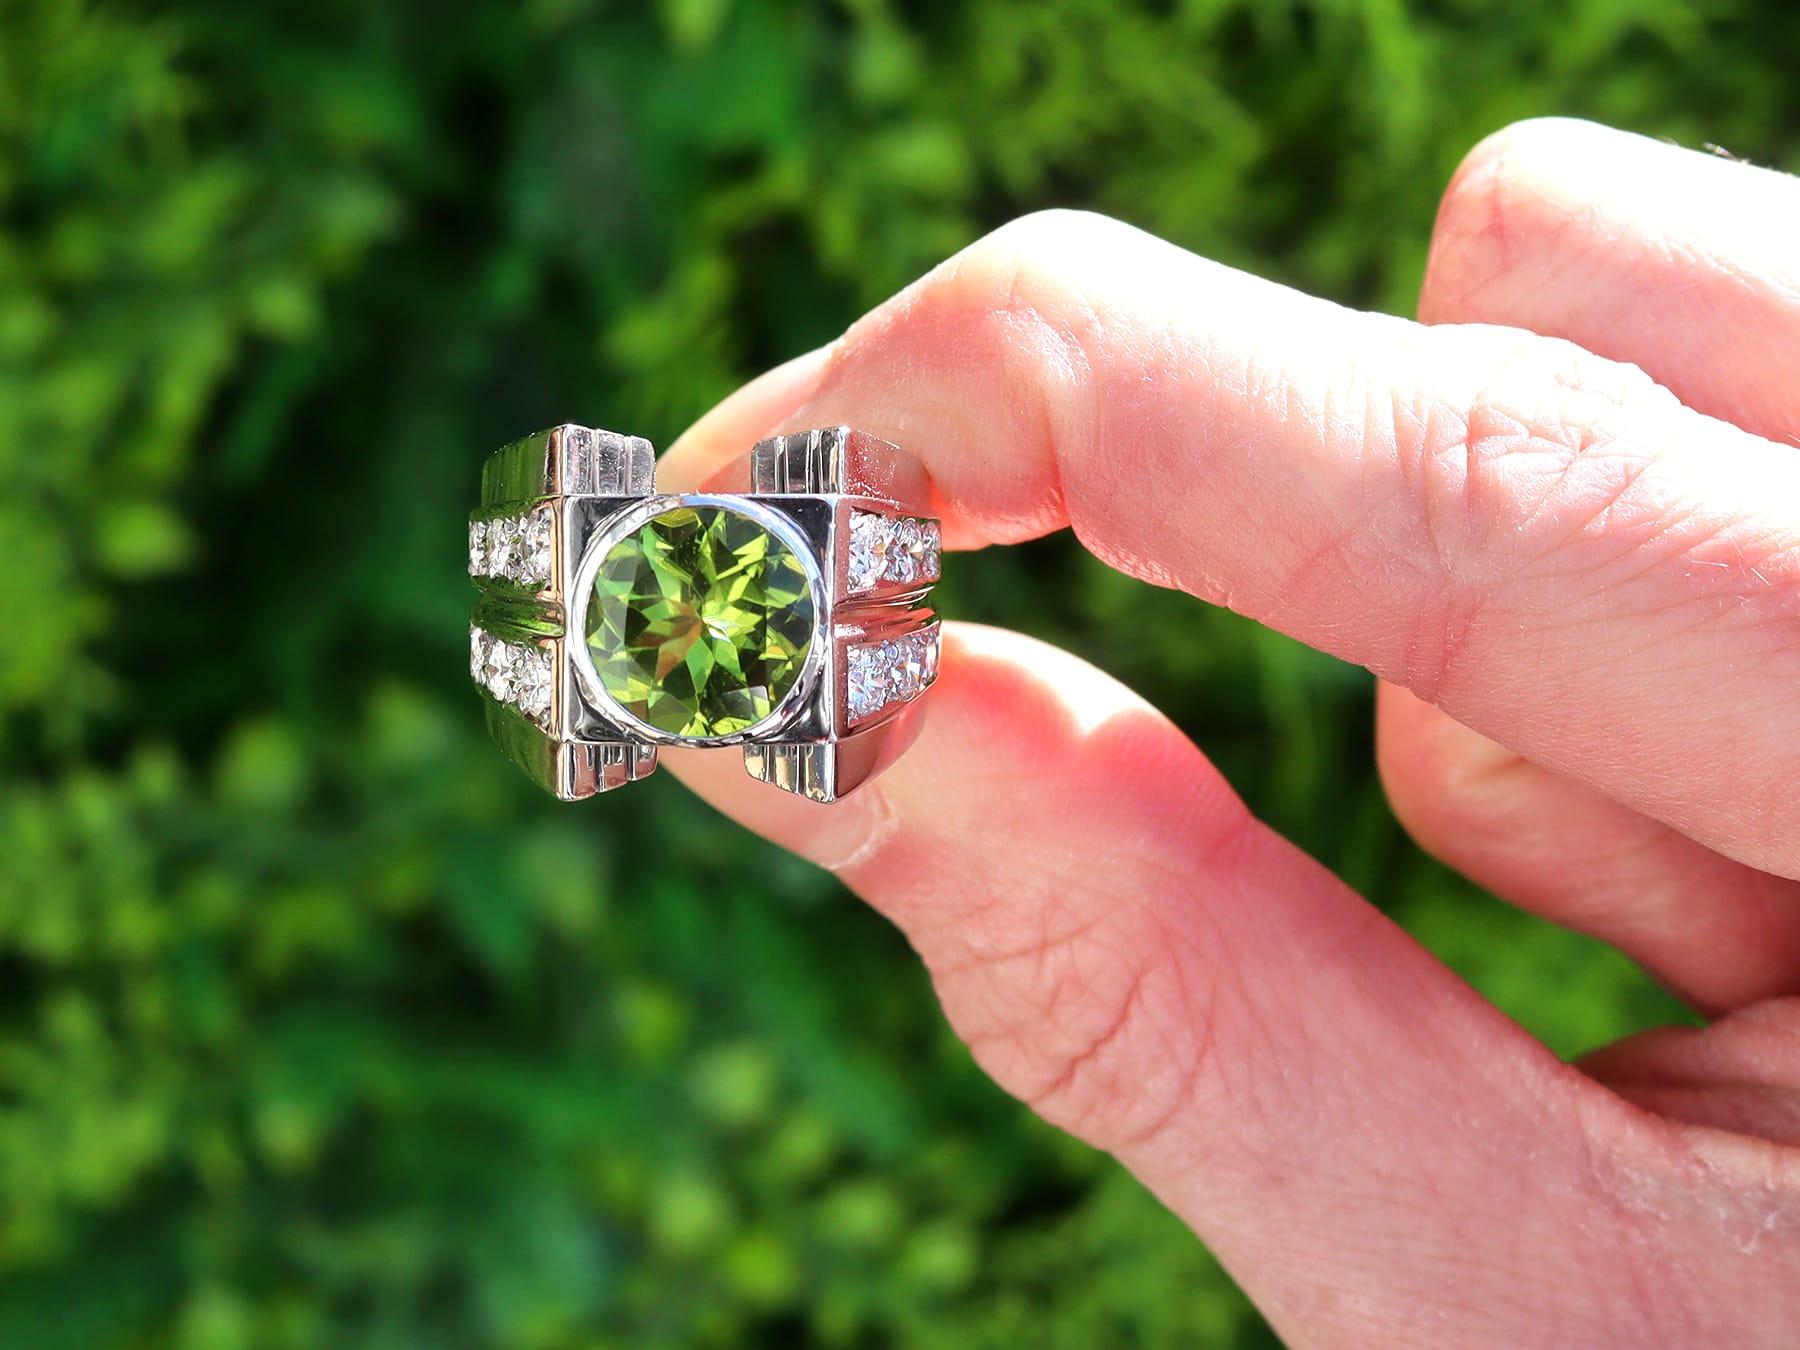 A stunning, fine and impressive vintage 3.41 carat peridot and 1.20 carat diamond and platinum cocktail ring; part of our diverse diamond jewellery and estate jewelry collections.

This stunning, fine and impressive vintage ring has been crafted in